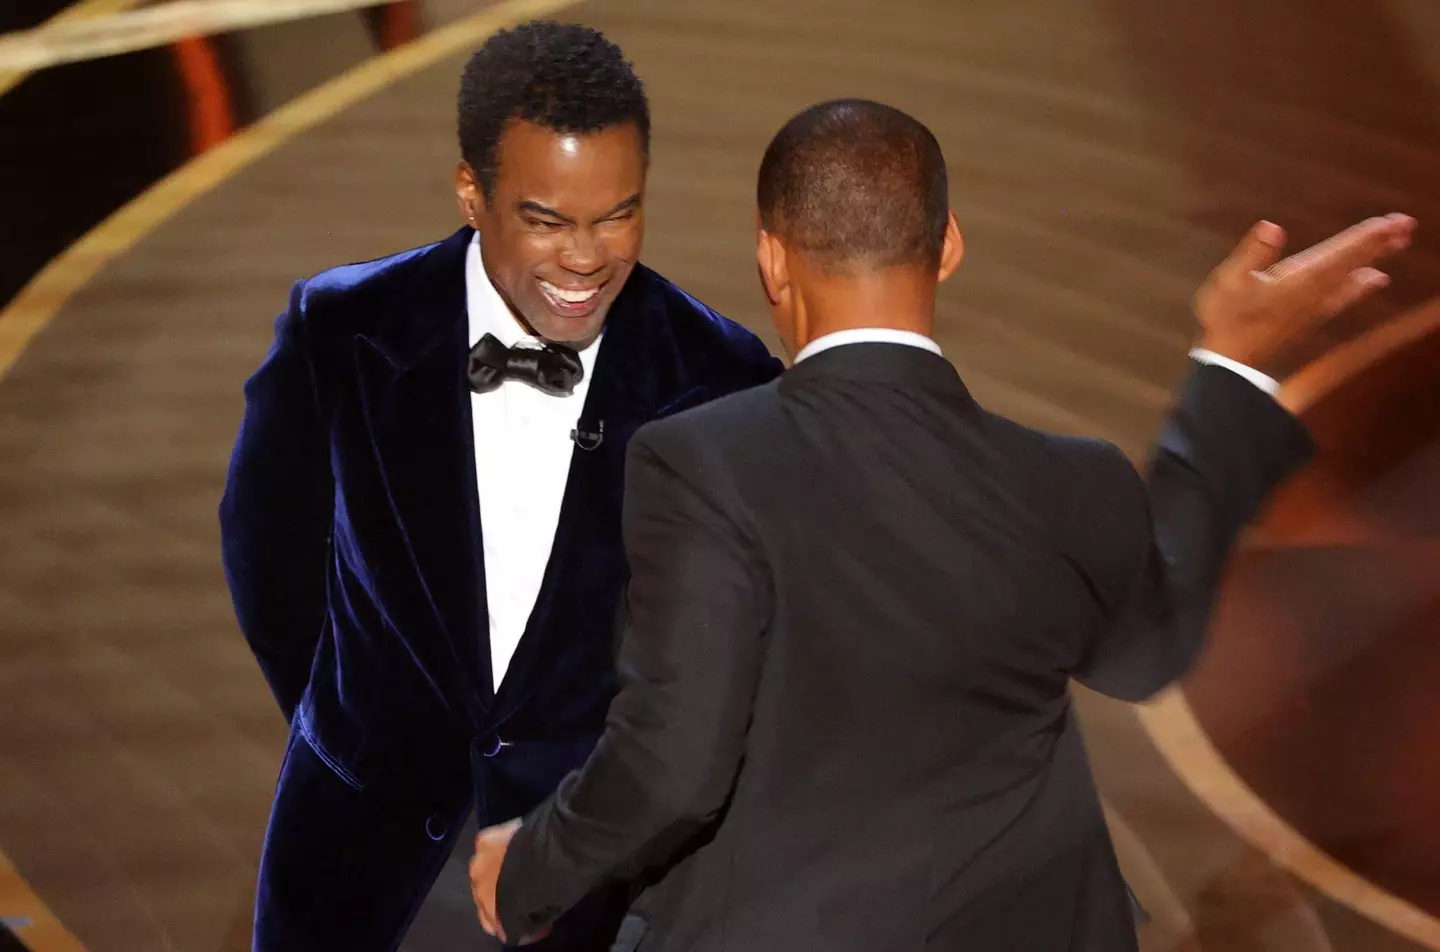 Will Smith slapped Chris Rock at the Oscars.